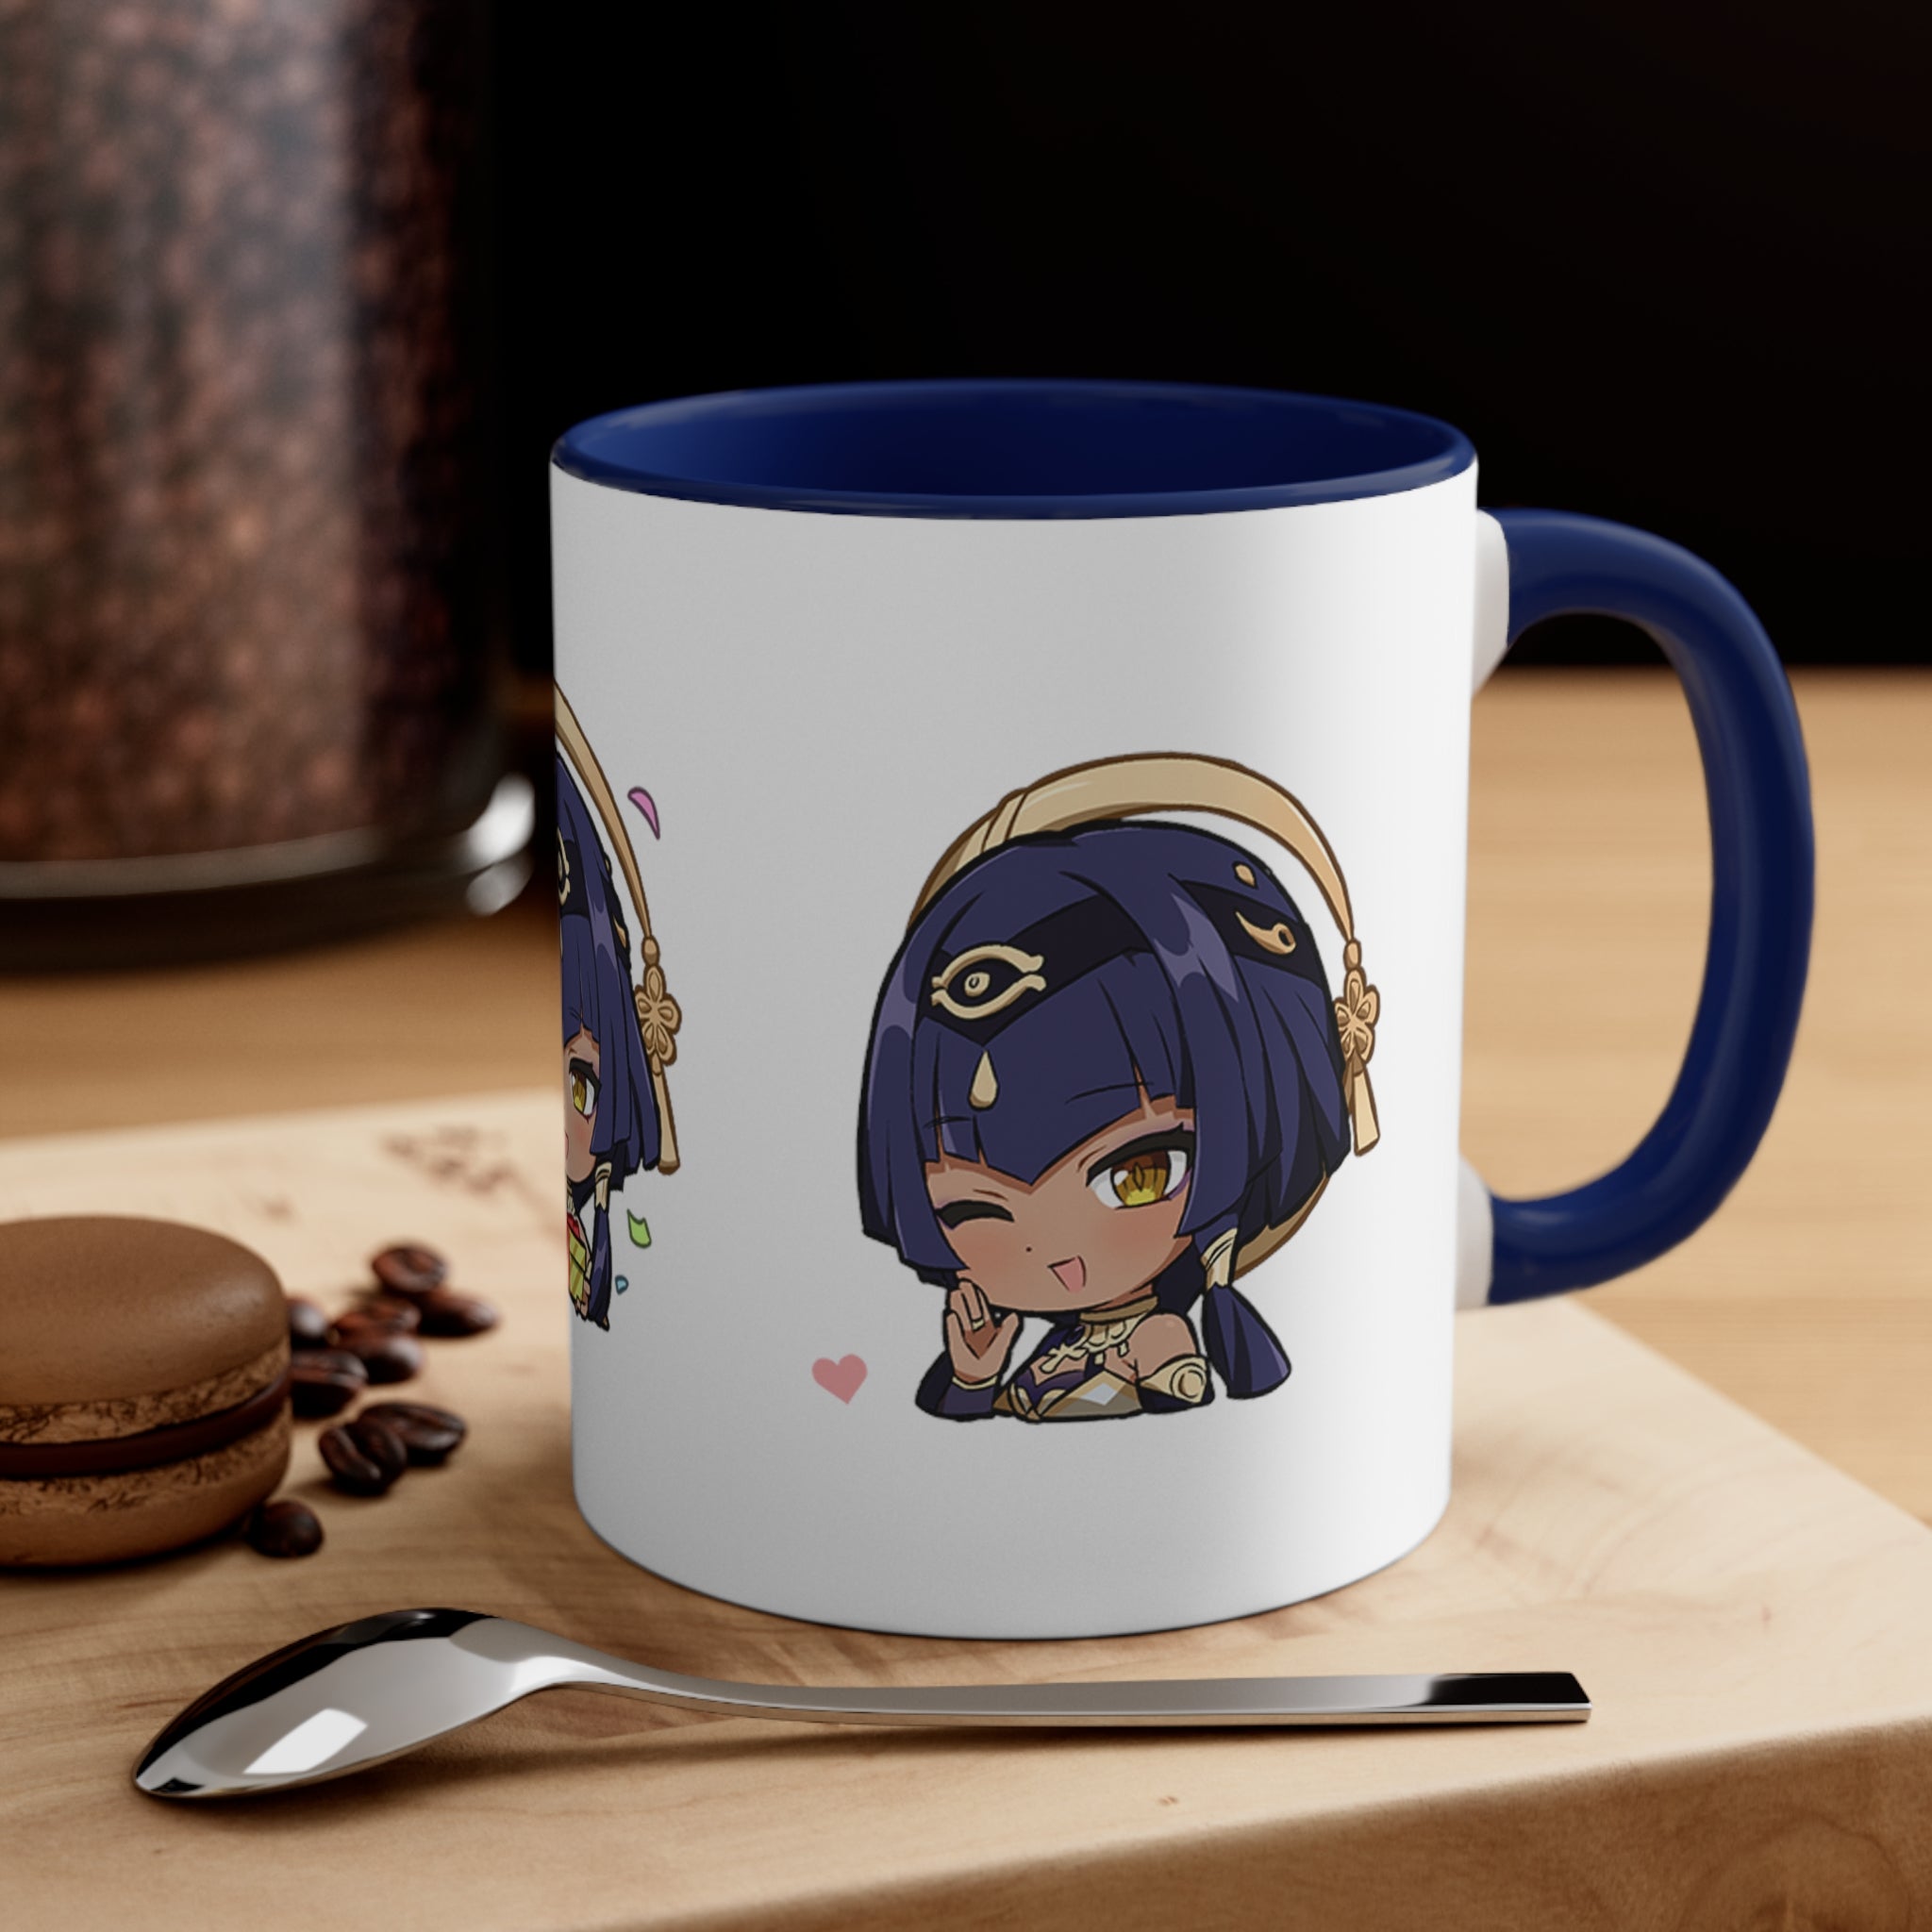 Candace Accent Coffee Mug, 11oz Cups Mugs Cup Gift For Gamer Gifts Game Anime Fanart Fan Birthday Valentine's Christmas